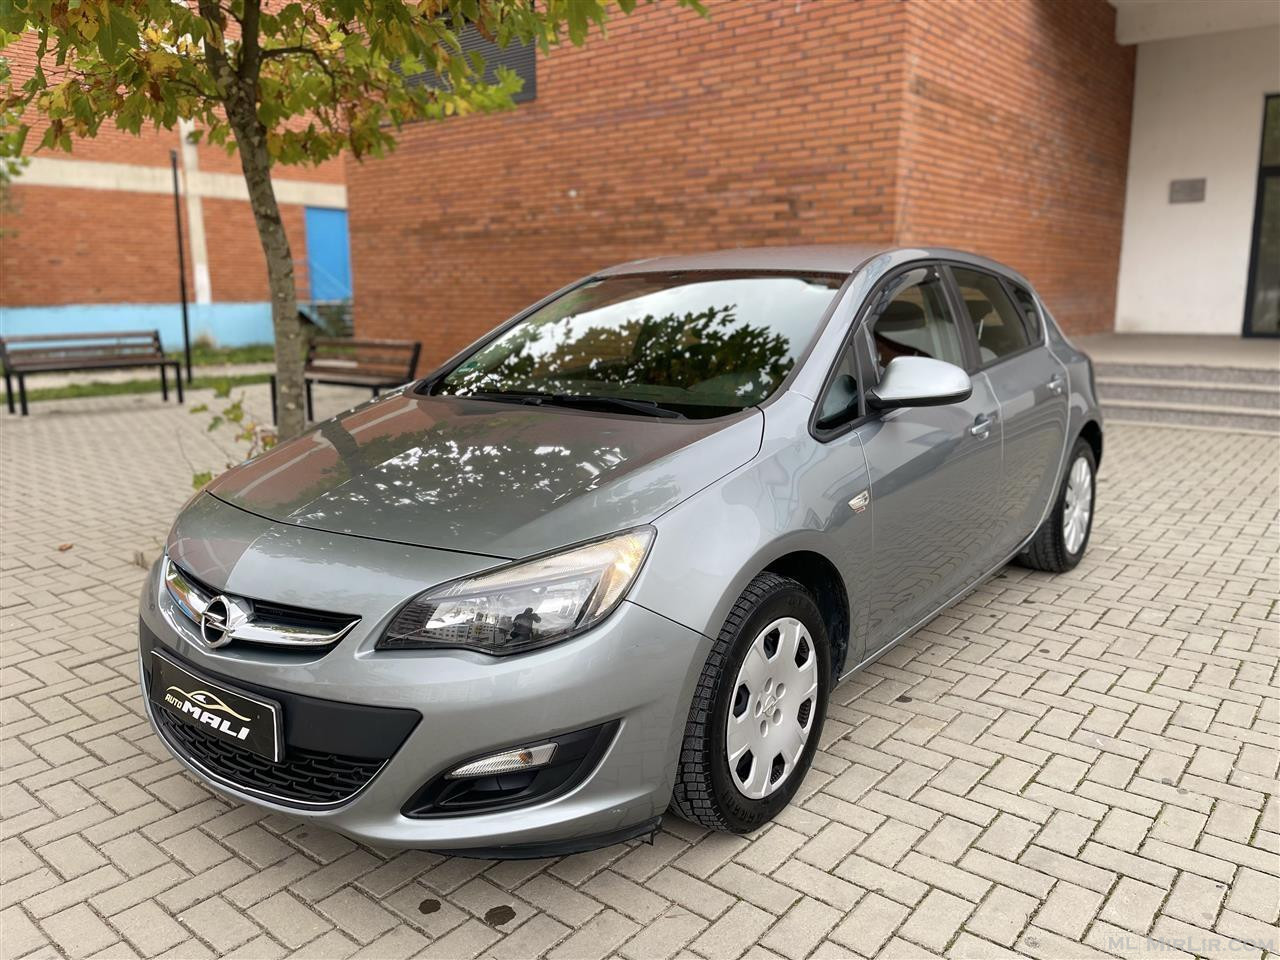 OPELL ASTRA 1.6 B - FUND 2015 - 140 KM ME LIBER